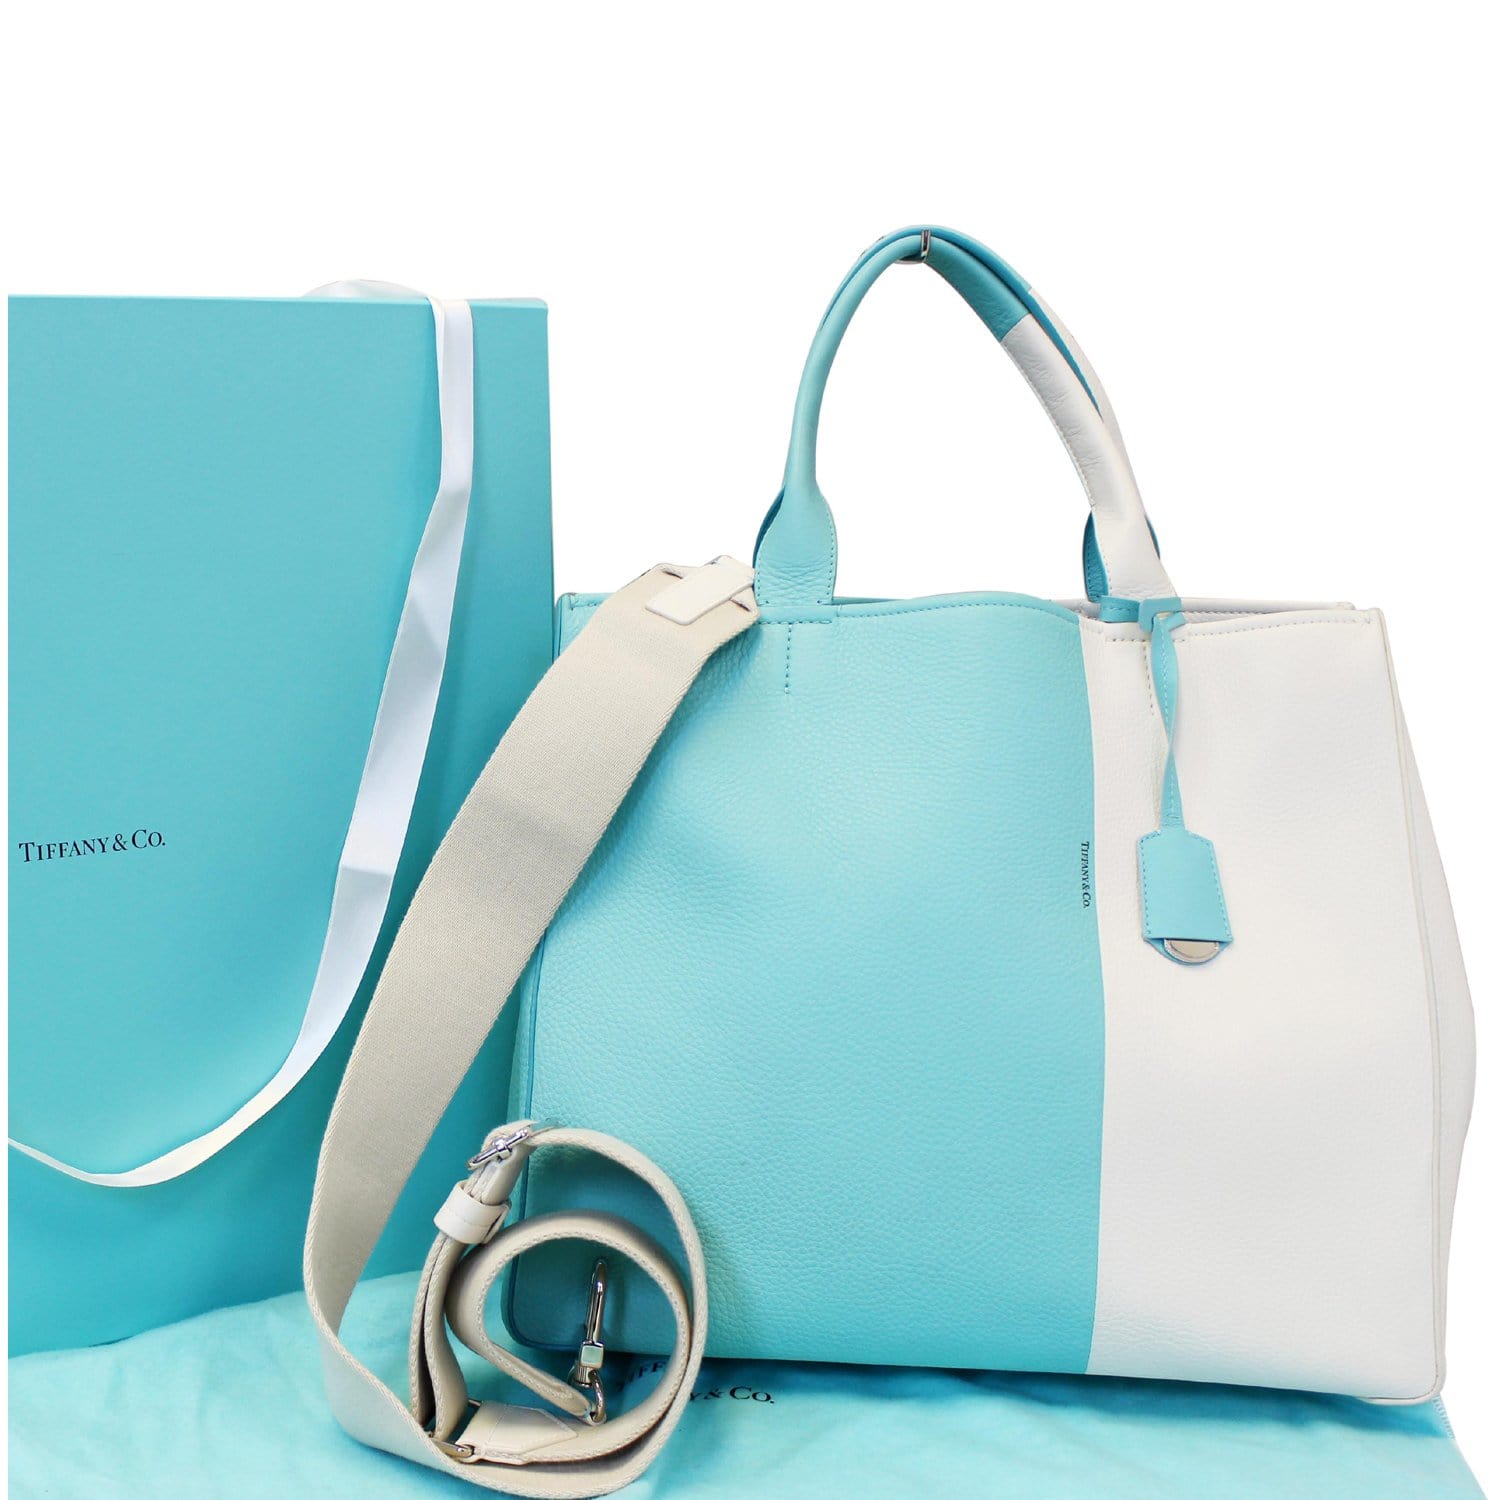 Tiffany & Co., Bags, Tiffany Co Canvas And Leather Purse